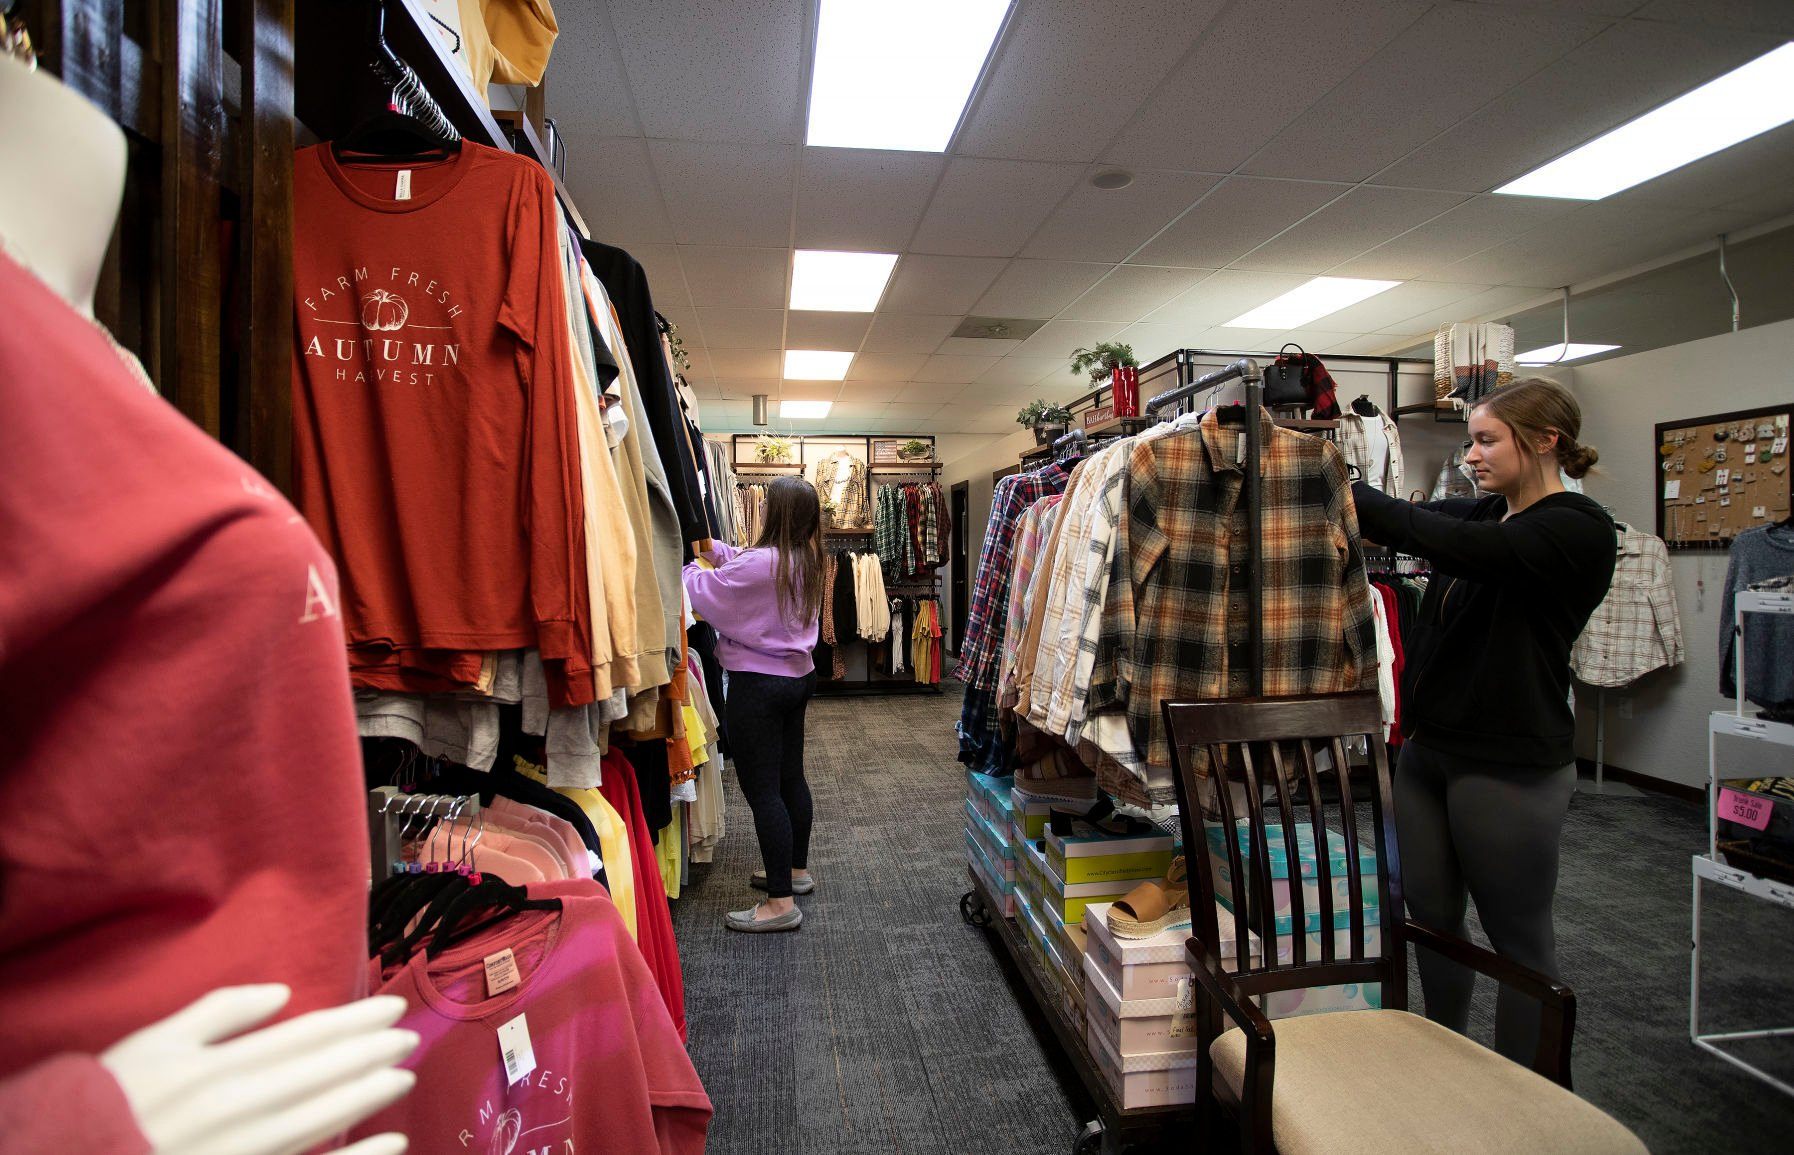 Kaeli Vorwald (left) and Morgan Mescher browse through clothes at Just For You Boutique.    PHOTO CREDIT: Stephen Gassman